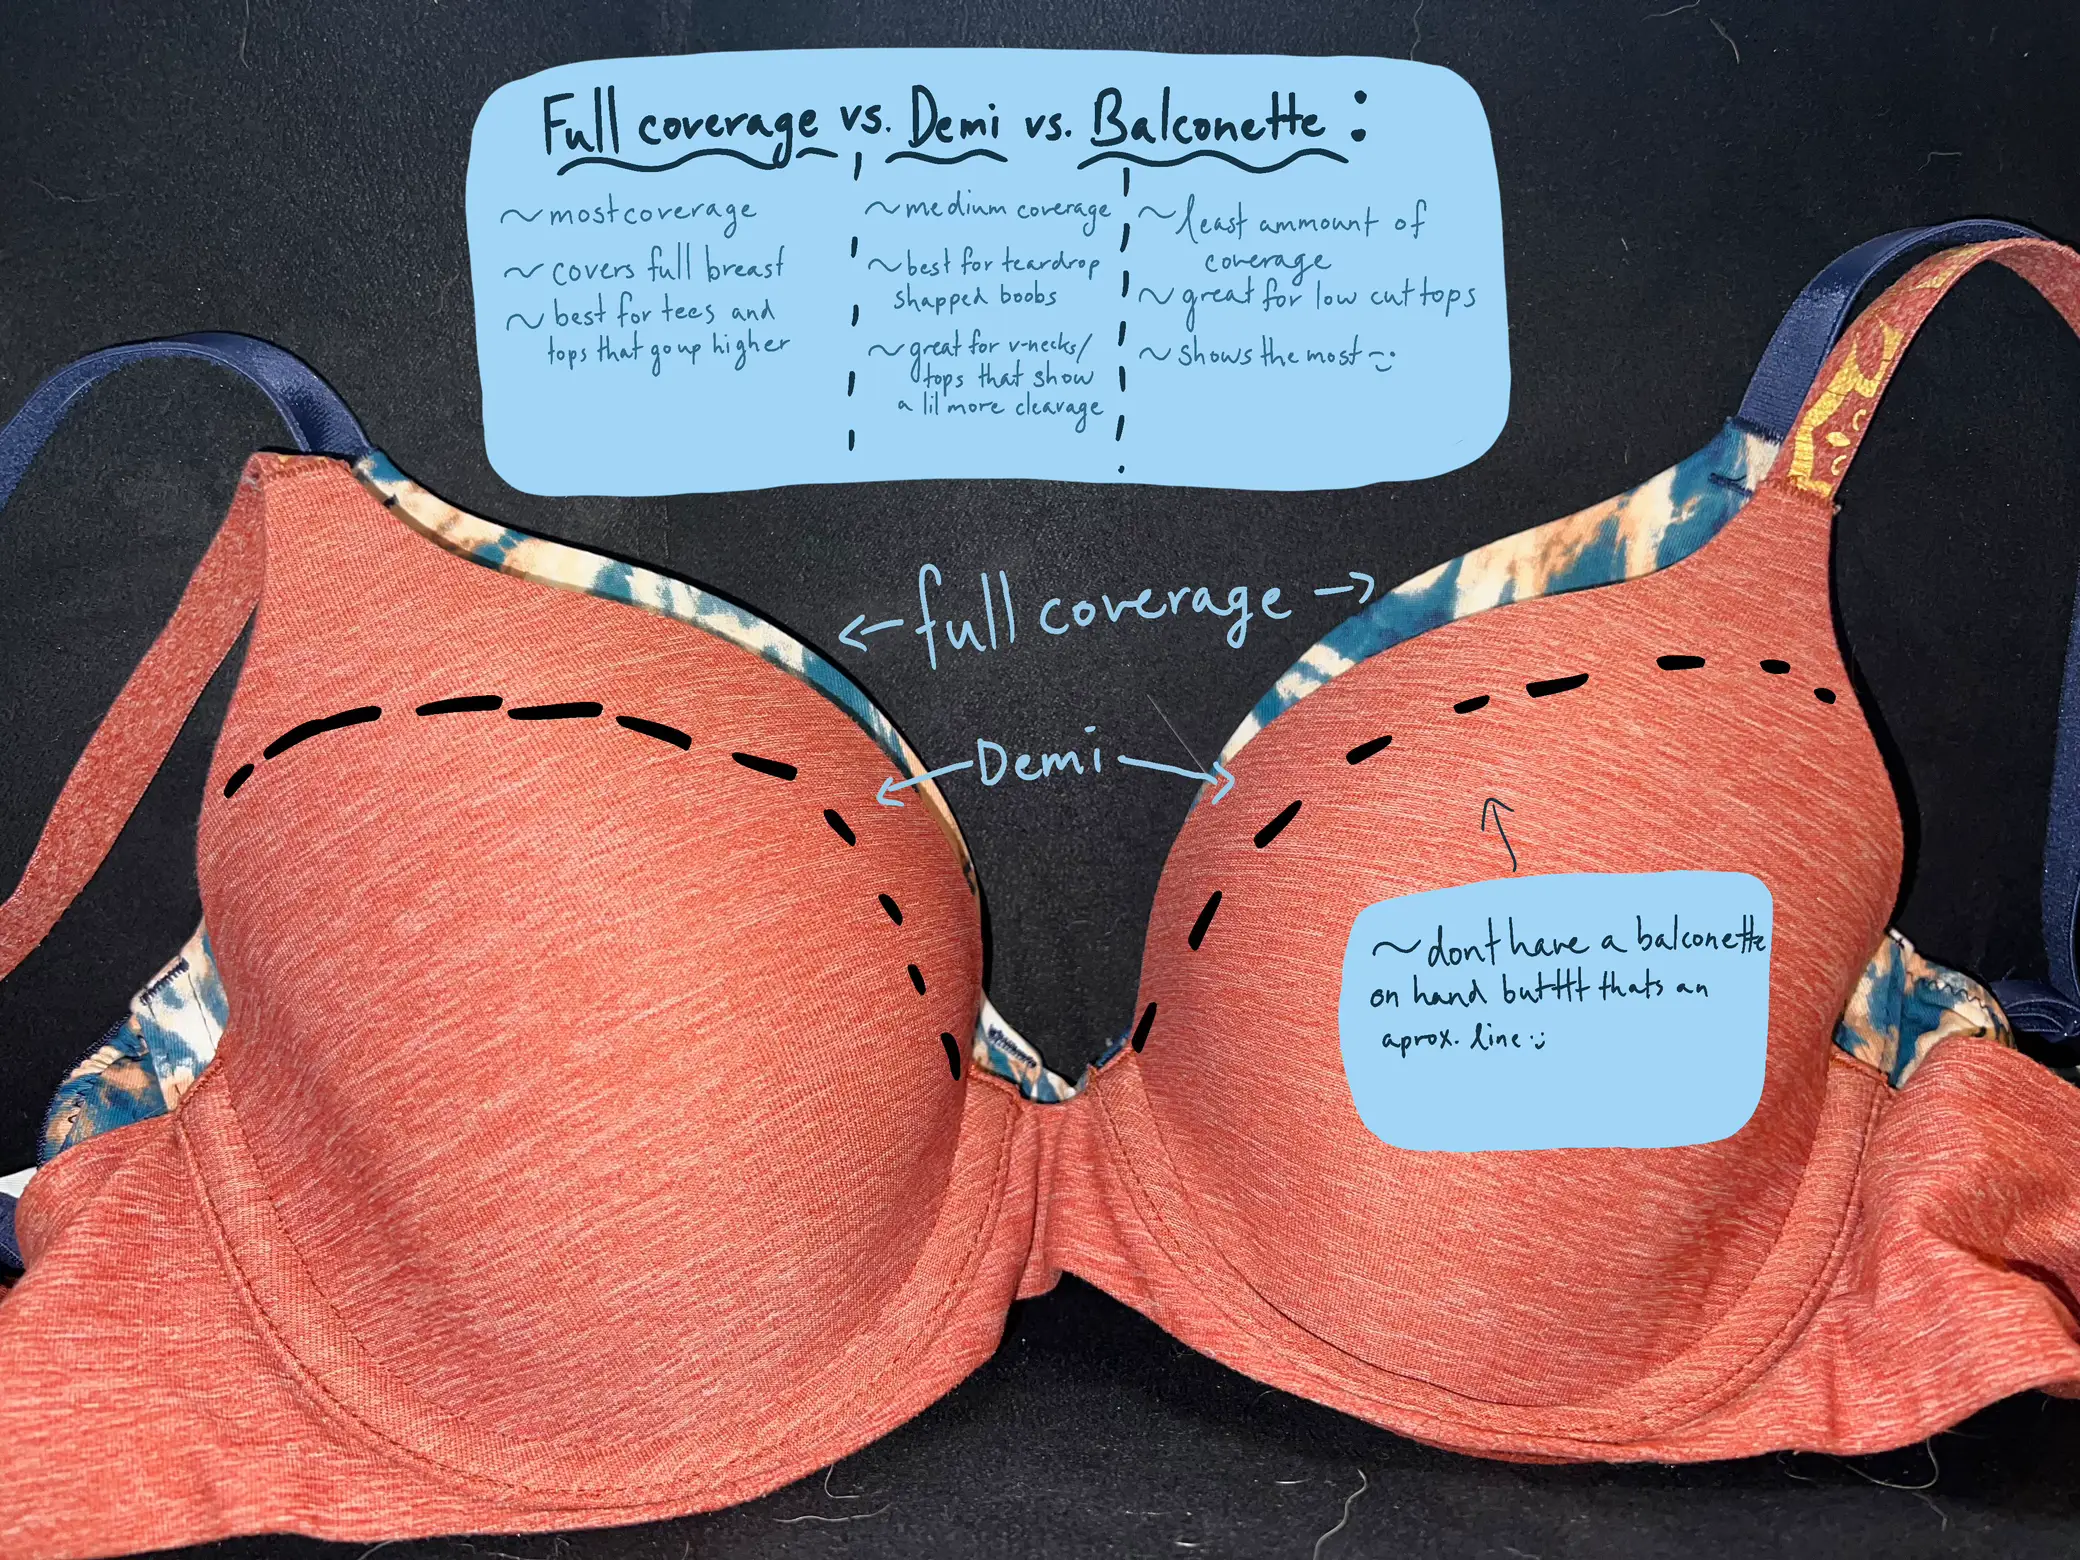 SALE] Various 32D and 30DD bras for sale. Information in comments. :  r/braswap